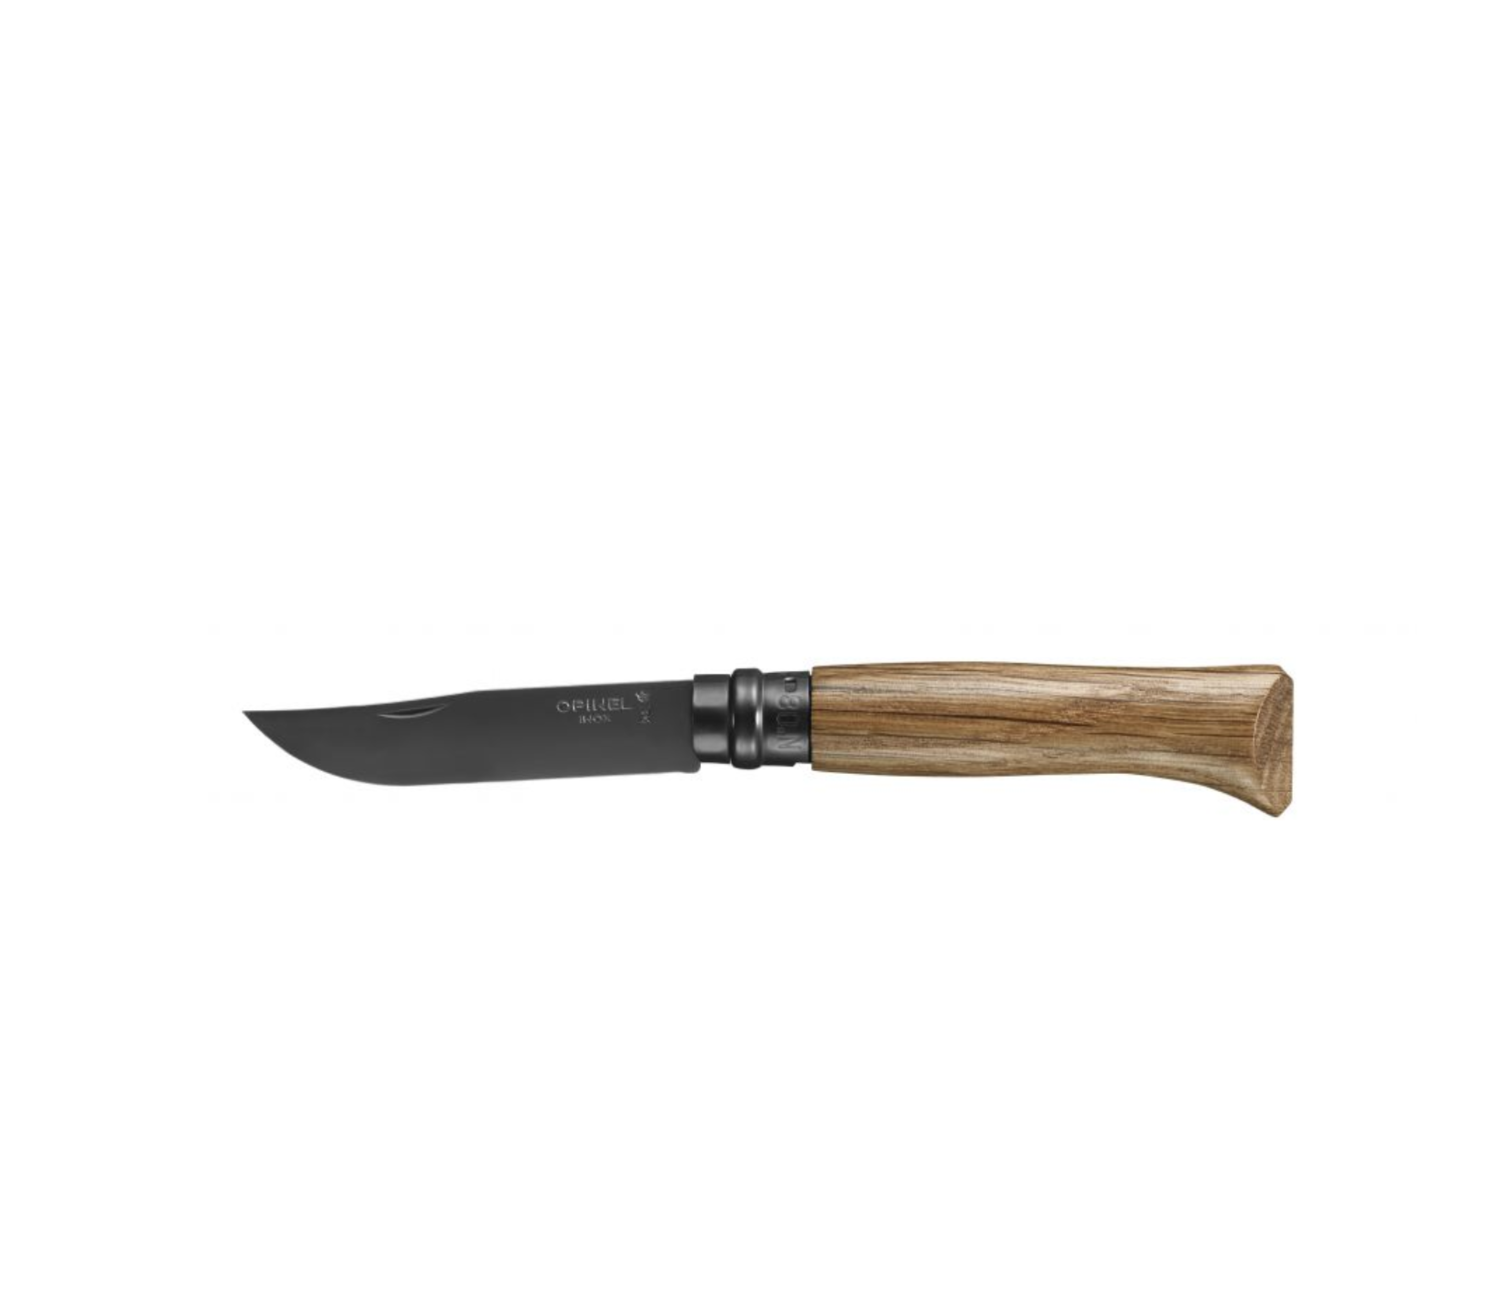 OPINEL N°8 COUTEAU CHENE BLACK INOX HOOD COUPE RANDONNE CAMPING CHASSE PECHE DECOUPE CUISINE 3123840019135 HOME COOKING KITCHEN NATURE INOX HOOD COMASOUND KARTEL CSK ONLINE